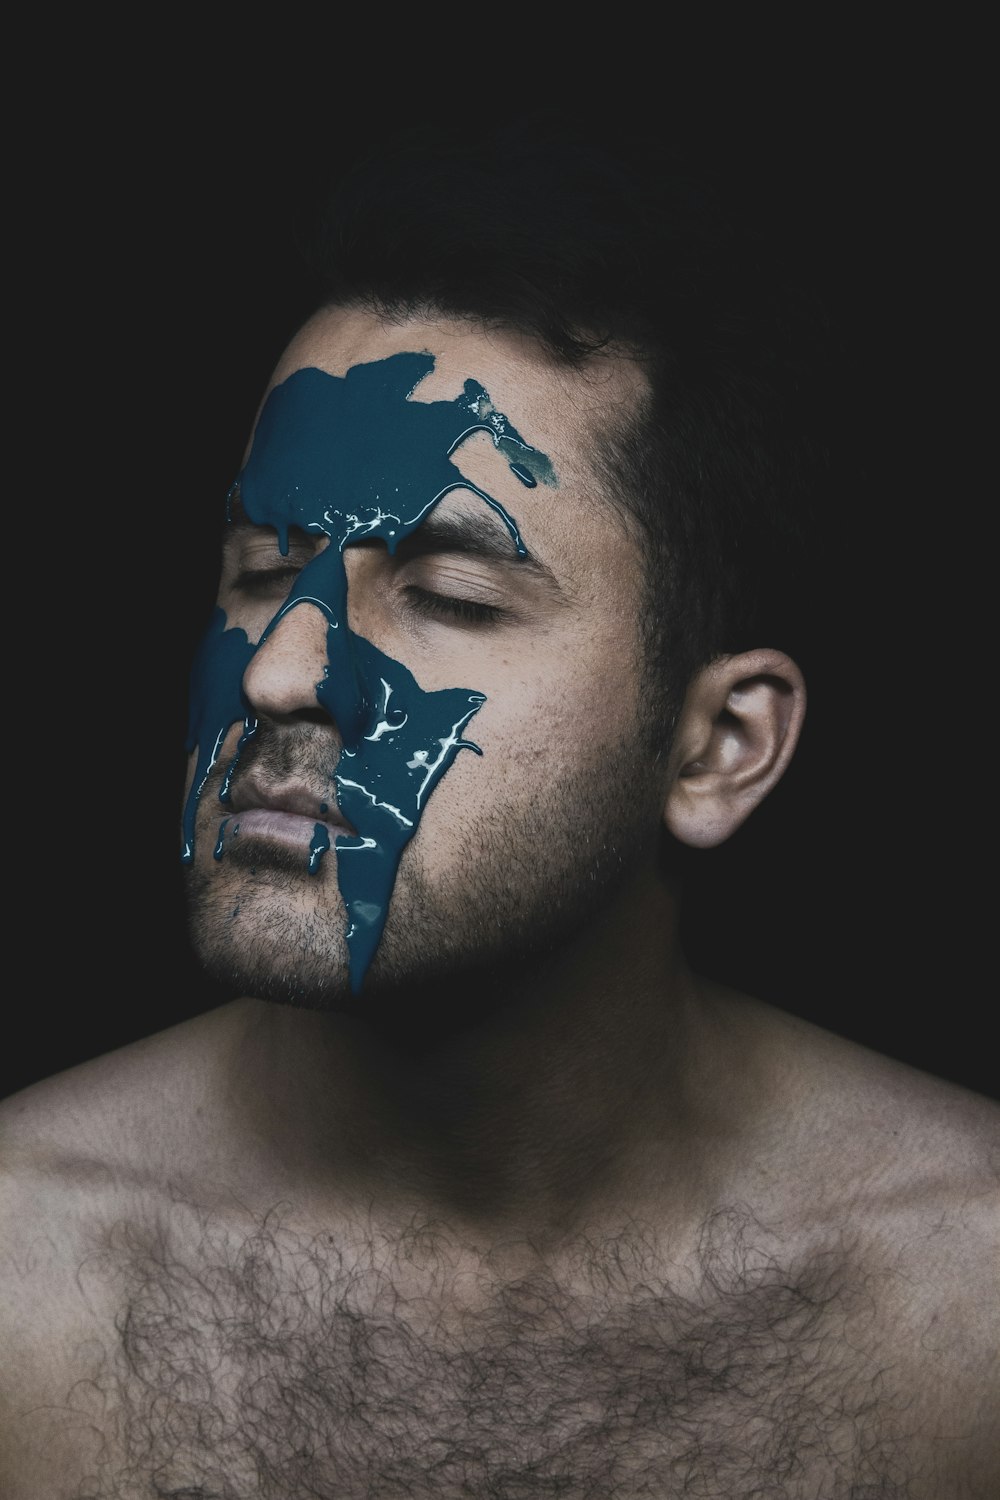 Man with blue and white face paint photo – Free Portraitstyle Image on  Unsplash